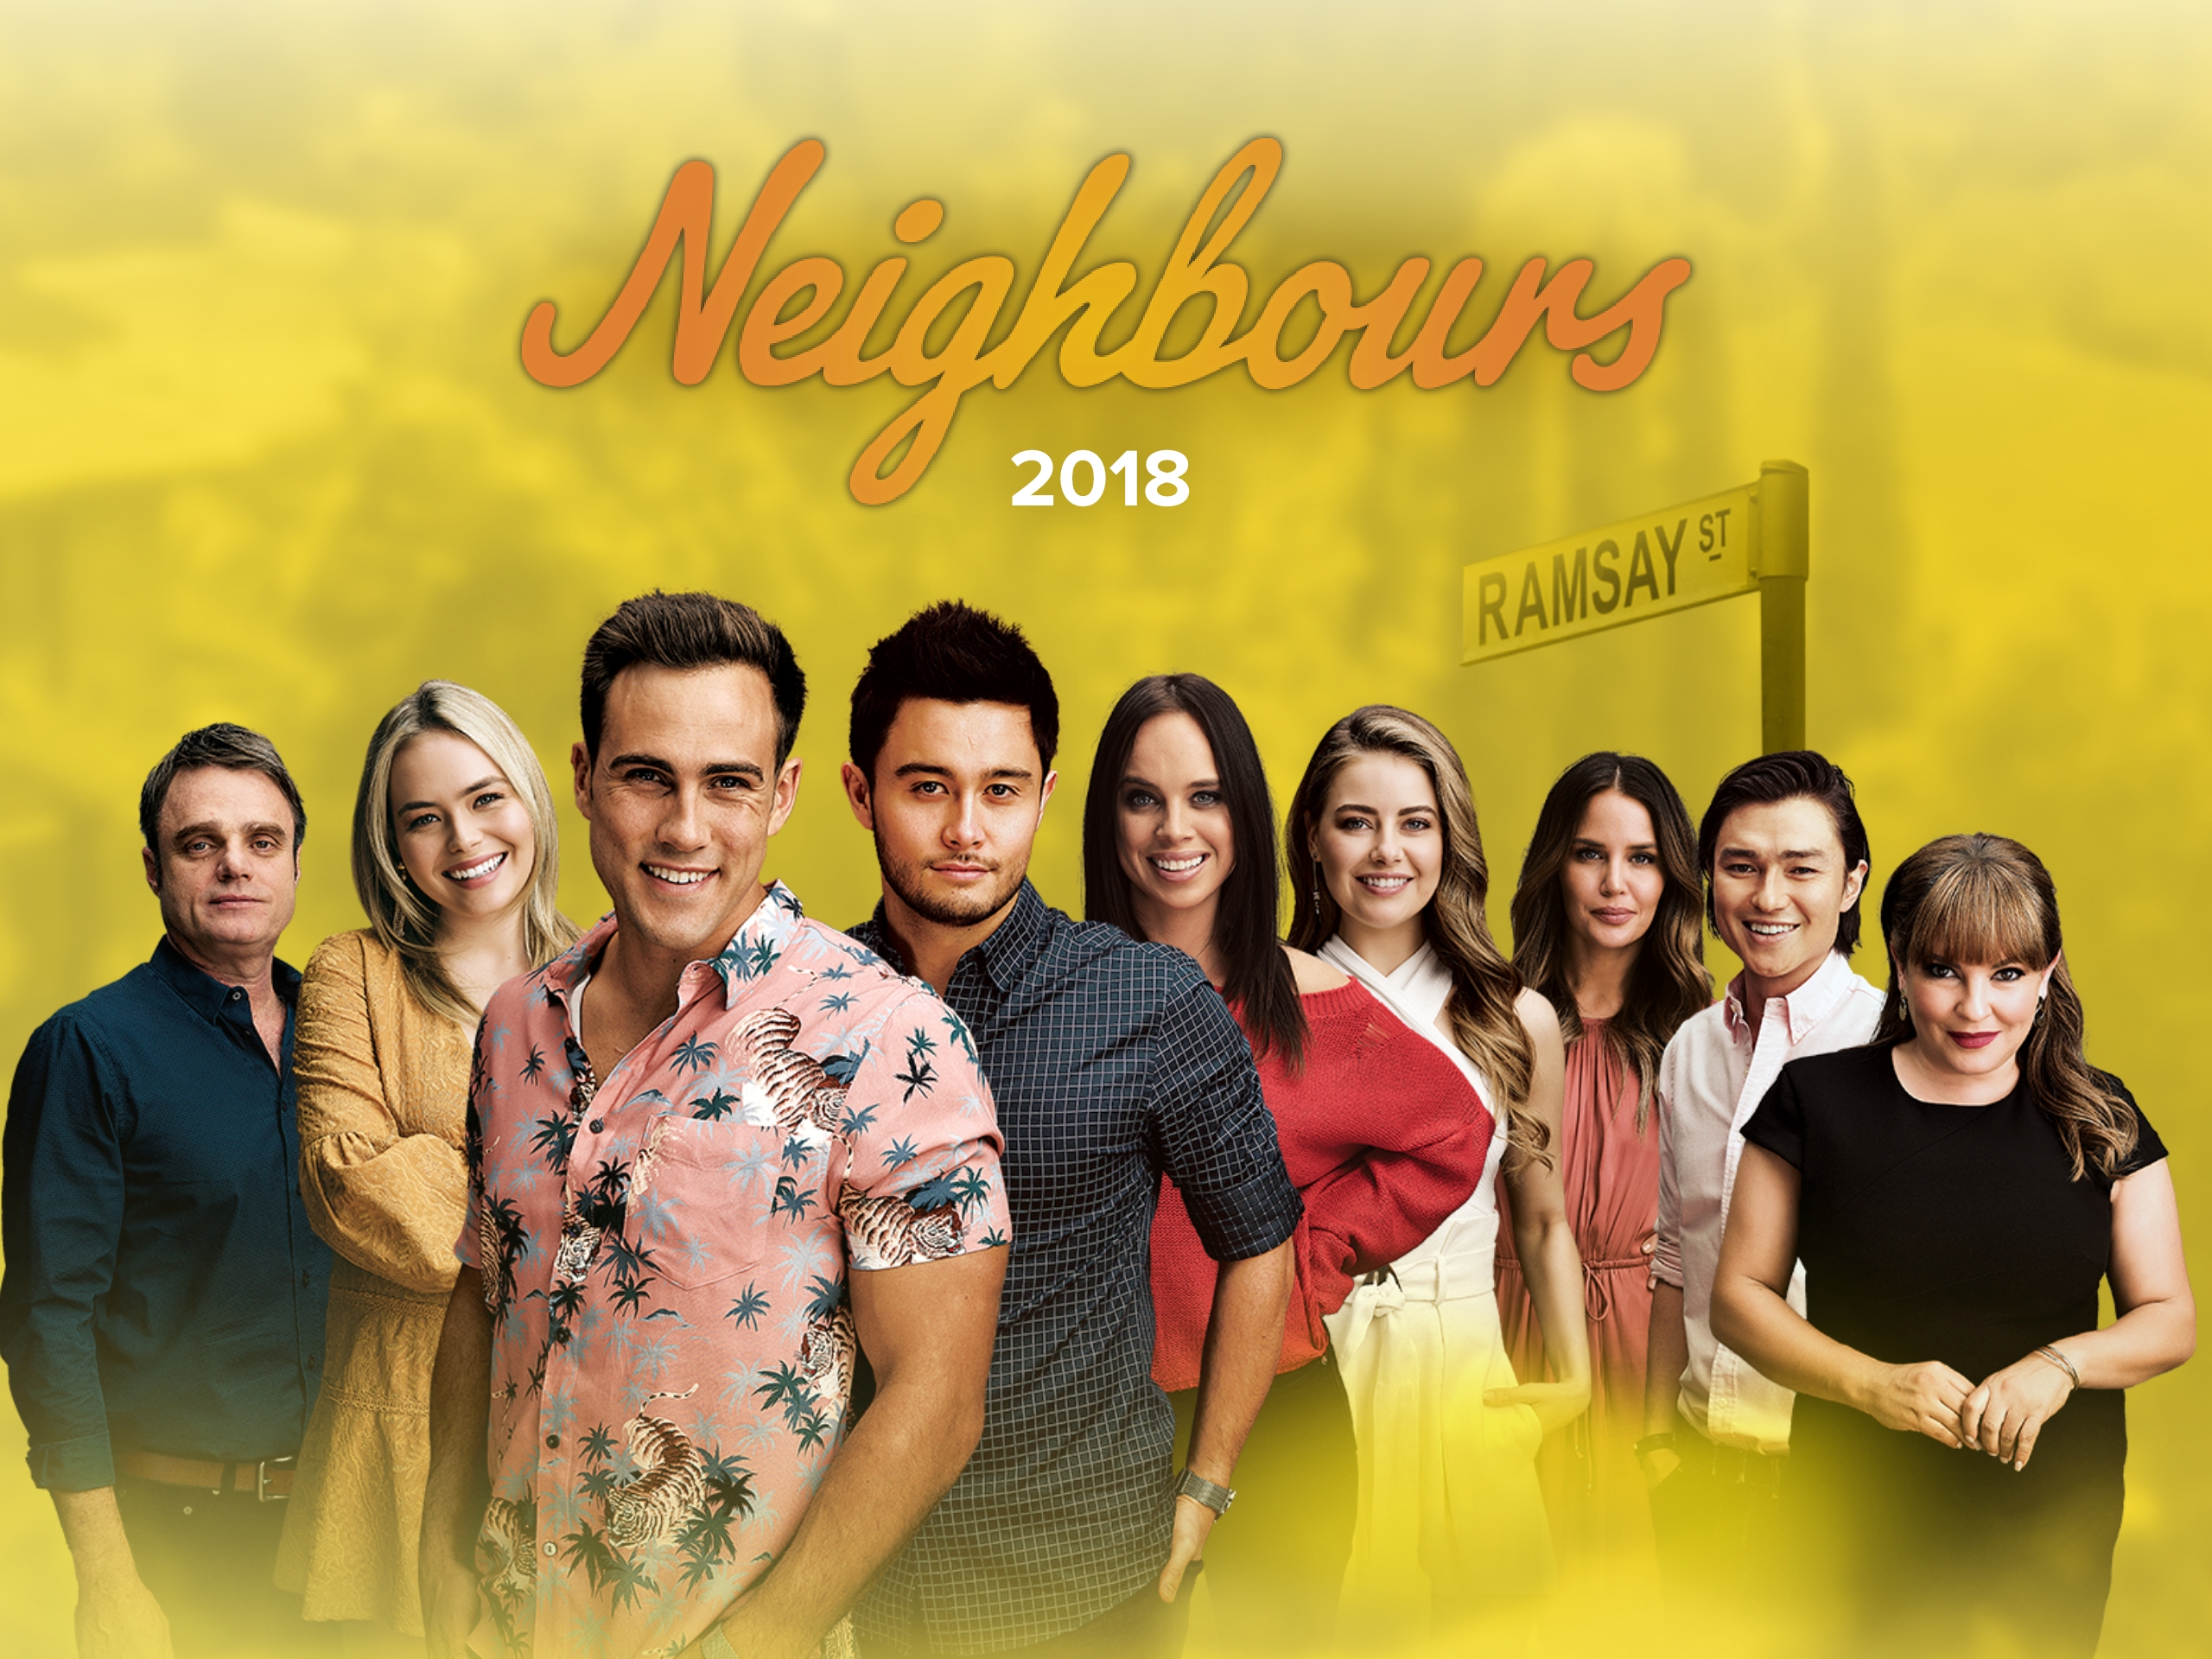 al frew recommends Watch Neighbours Online Free